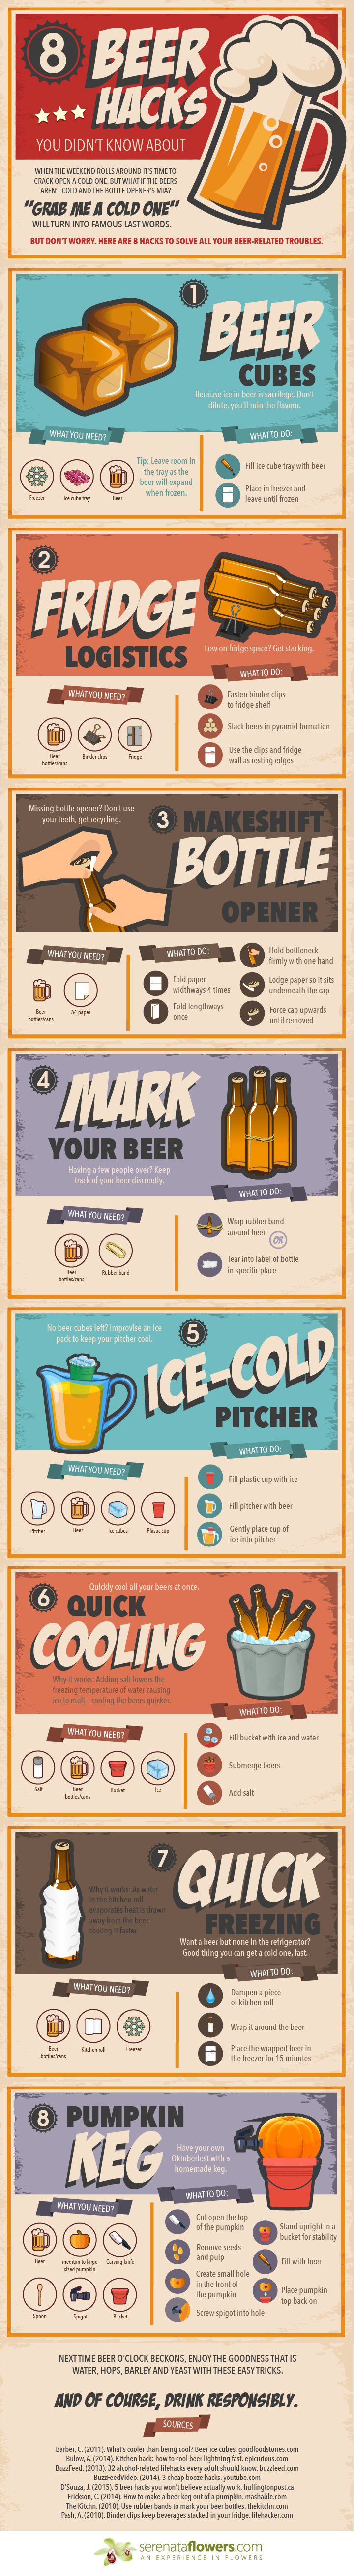 8-Beer-hacks-you-didnt-know-about-V1